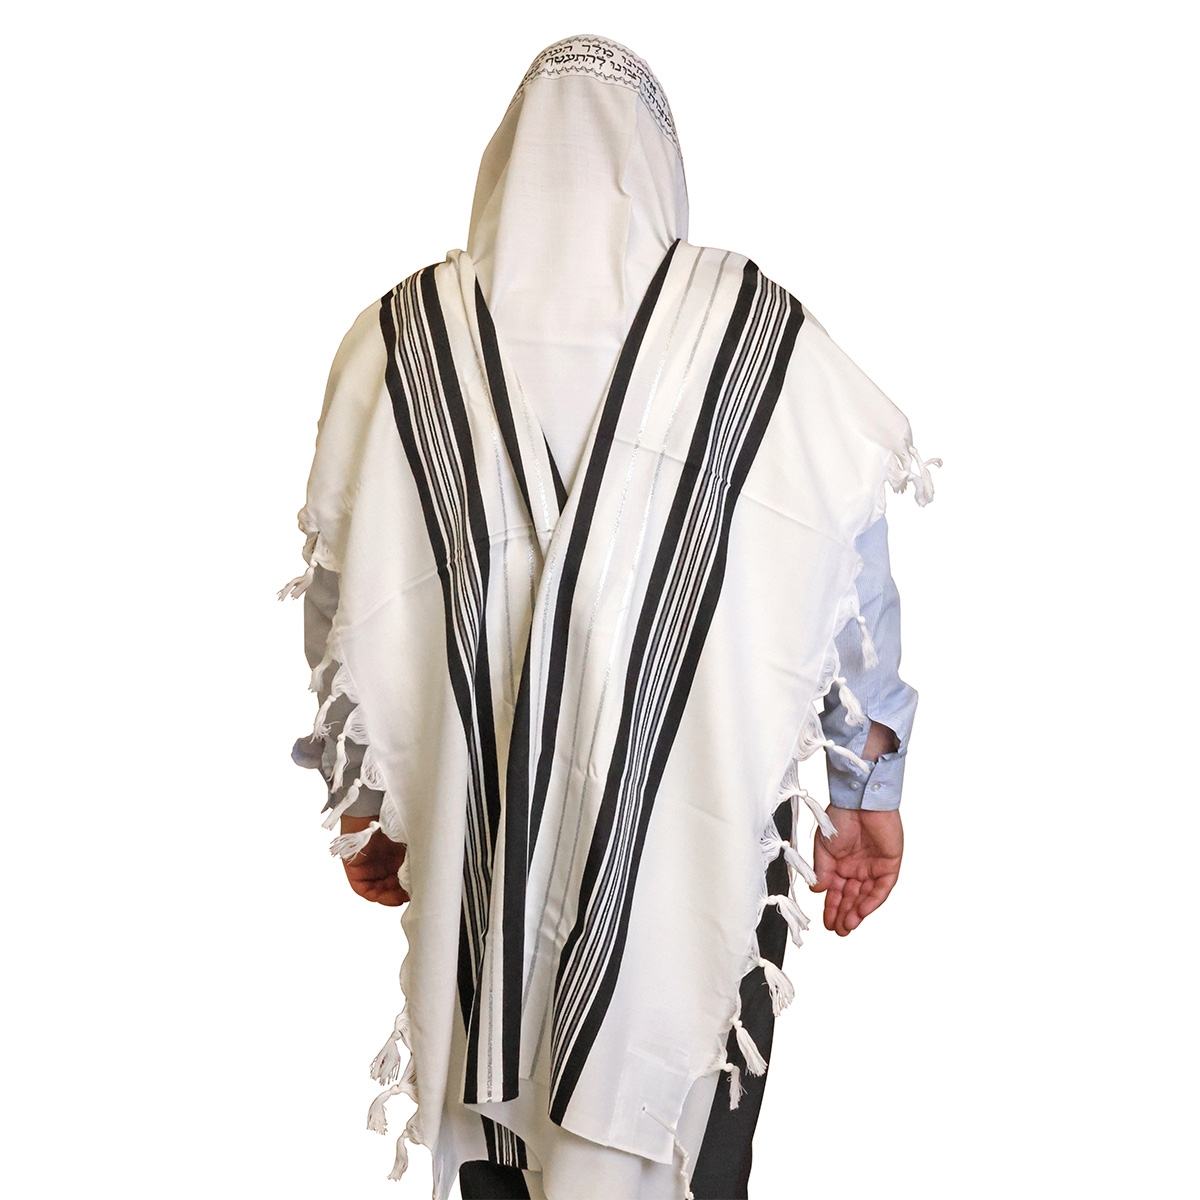 Traditional Pure Wool Tallit. Black with silver stripes